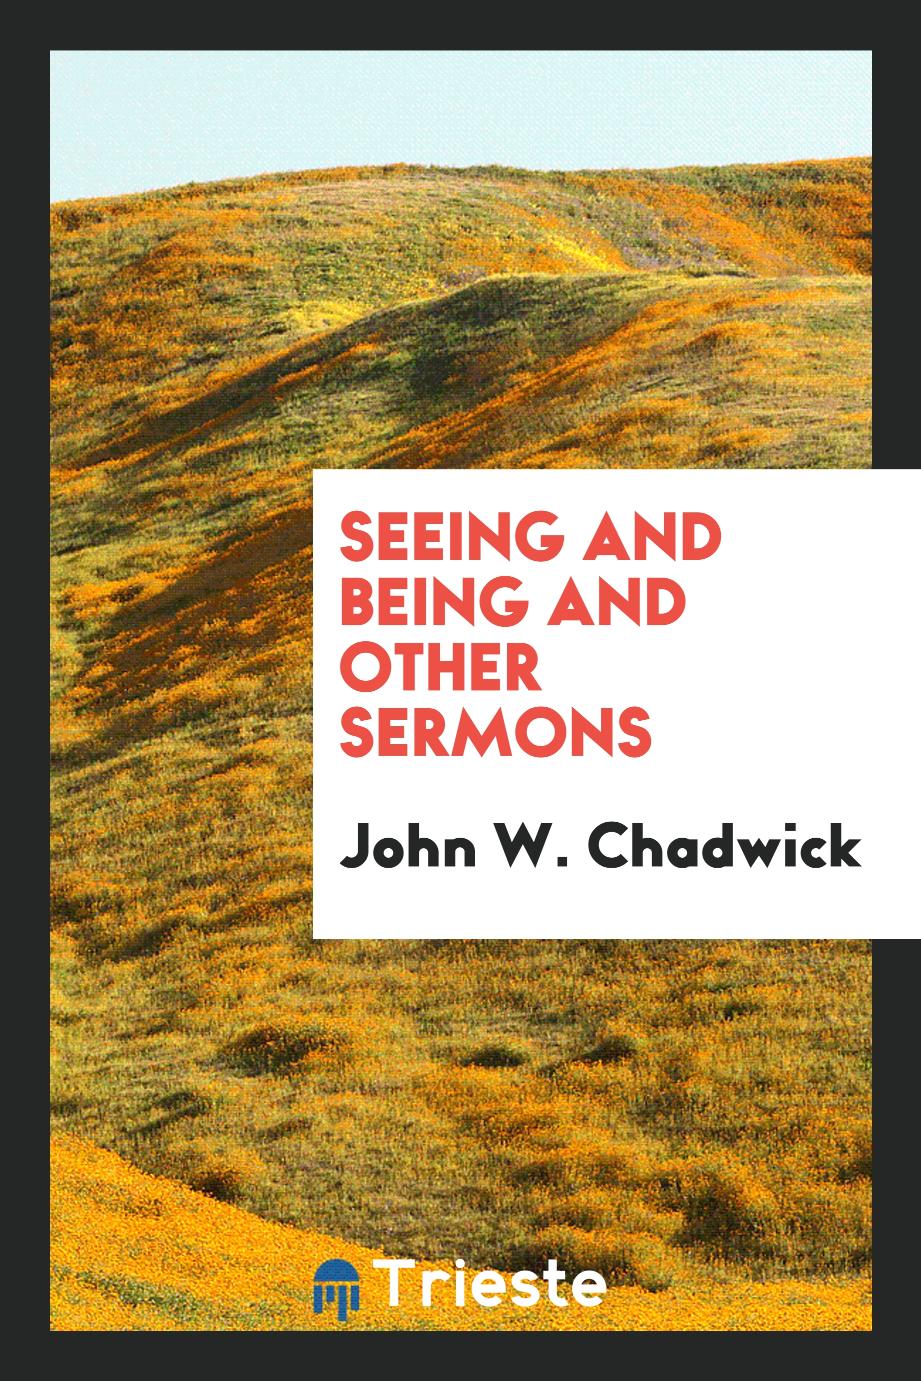 Seeing and Being and Other Sermons